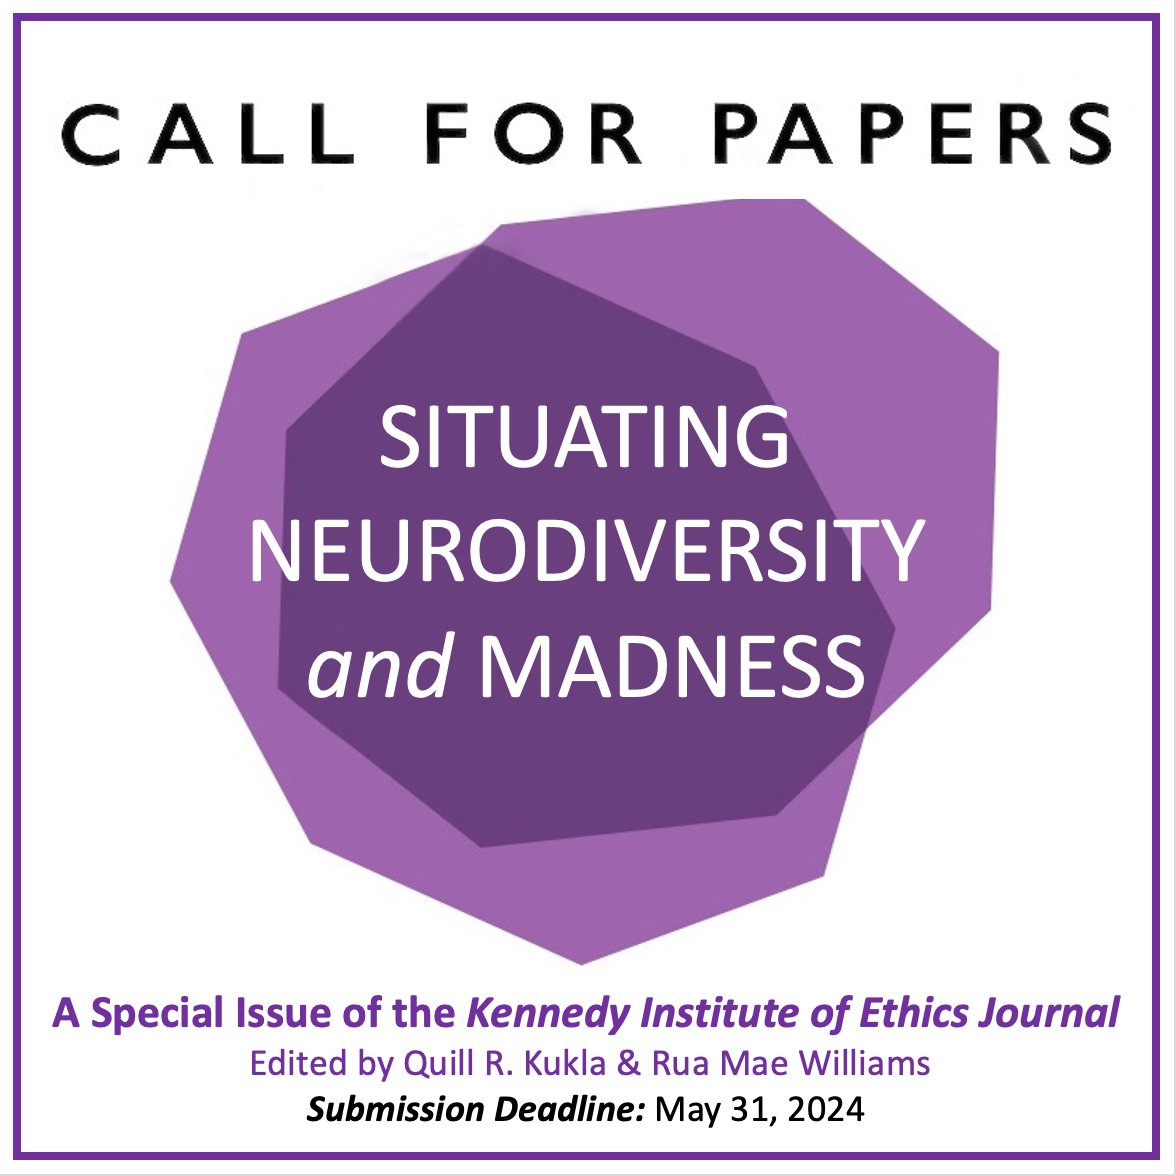 CALL FOR PAPERS — Special Issue: Situating Neurodiversity and Madness, edited by @QuillRKukla & Rua Mae Williams (@FractalEcho) Submission Deadline: May 31, 2024 For more information about submitting to this special issue of the KIEJ, see: philevents.org/event/show/119…